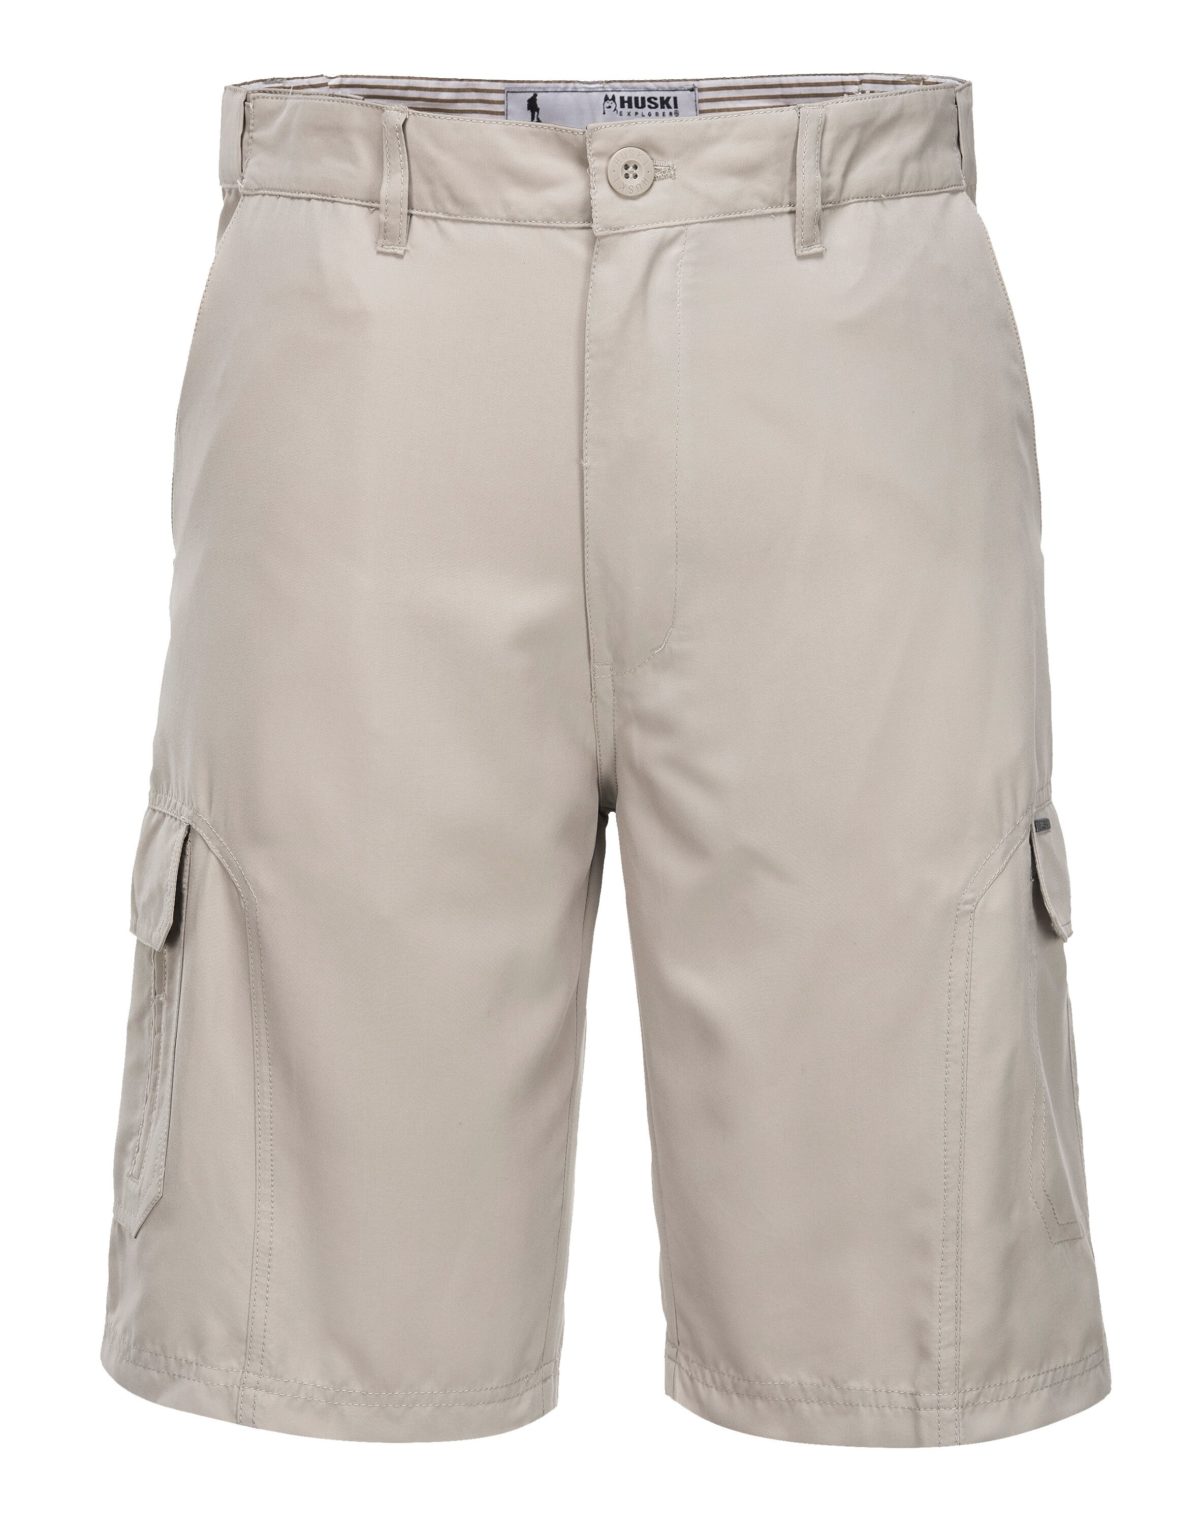 Trousers and Shorts - Safety Online